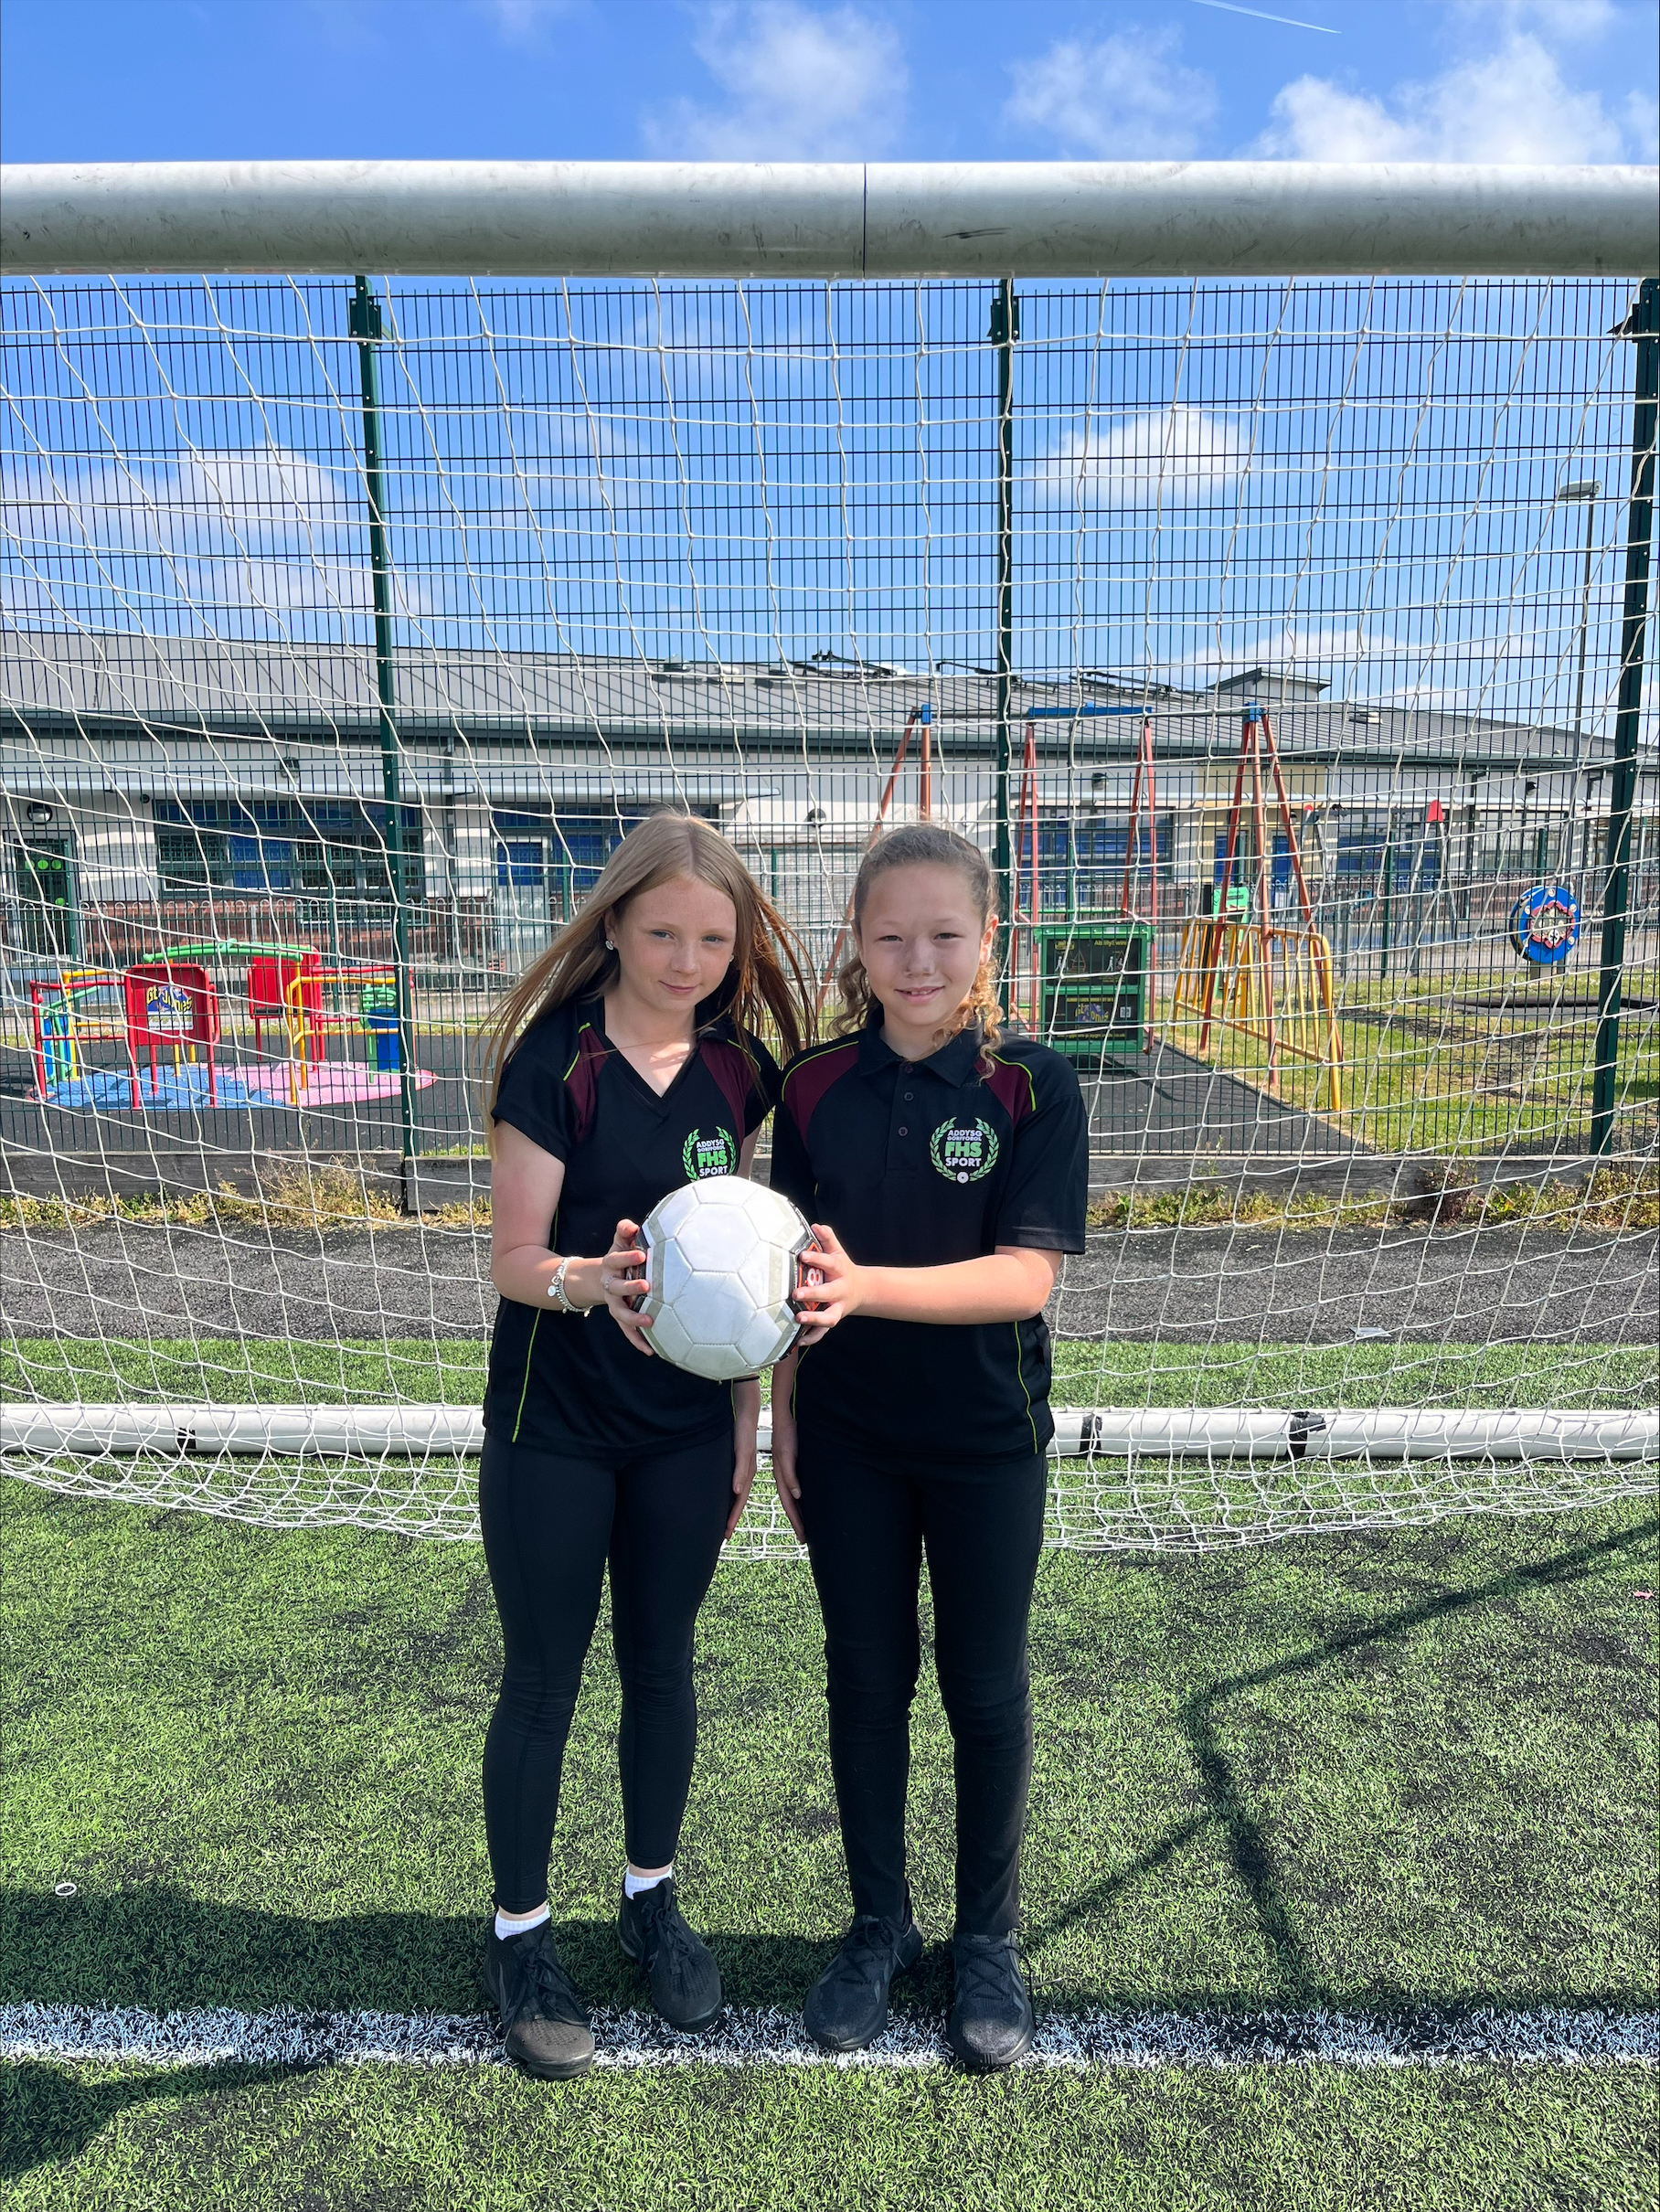 Two of the school’s football influencers, Ava Morris and Nevaeh Byles, in their Flint High School PE kits.